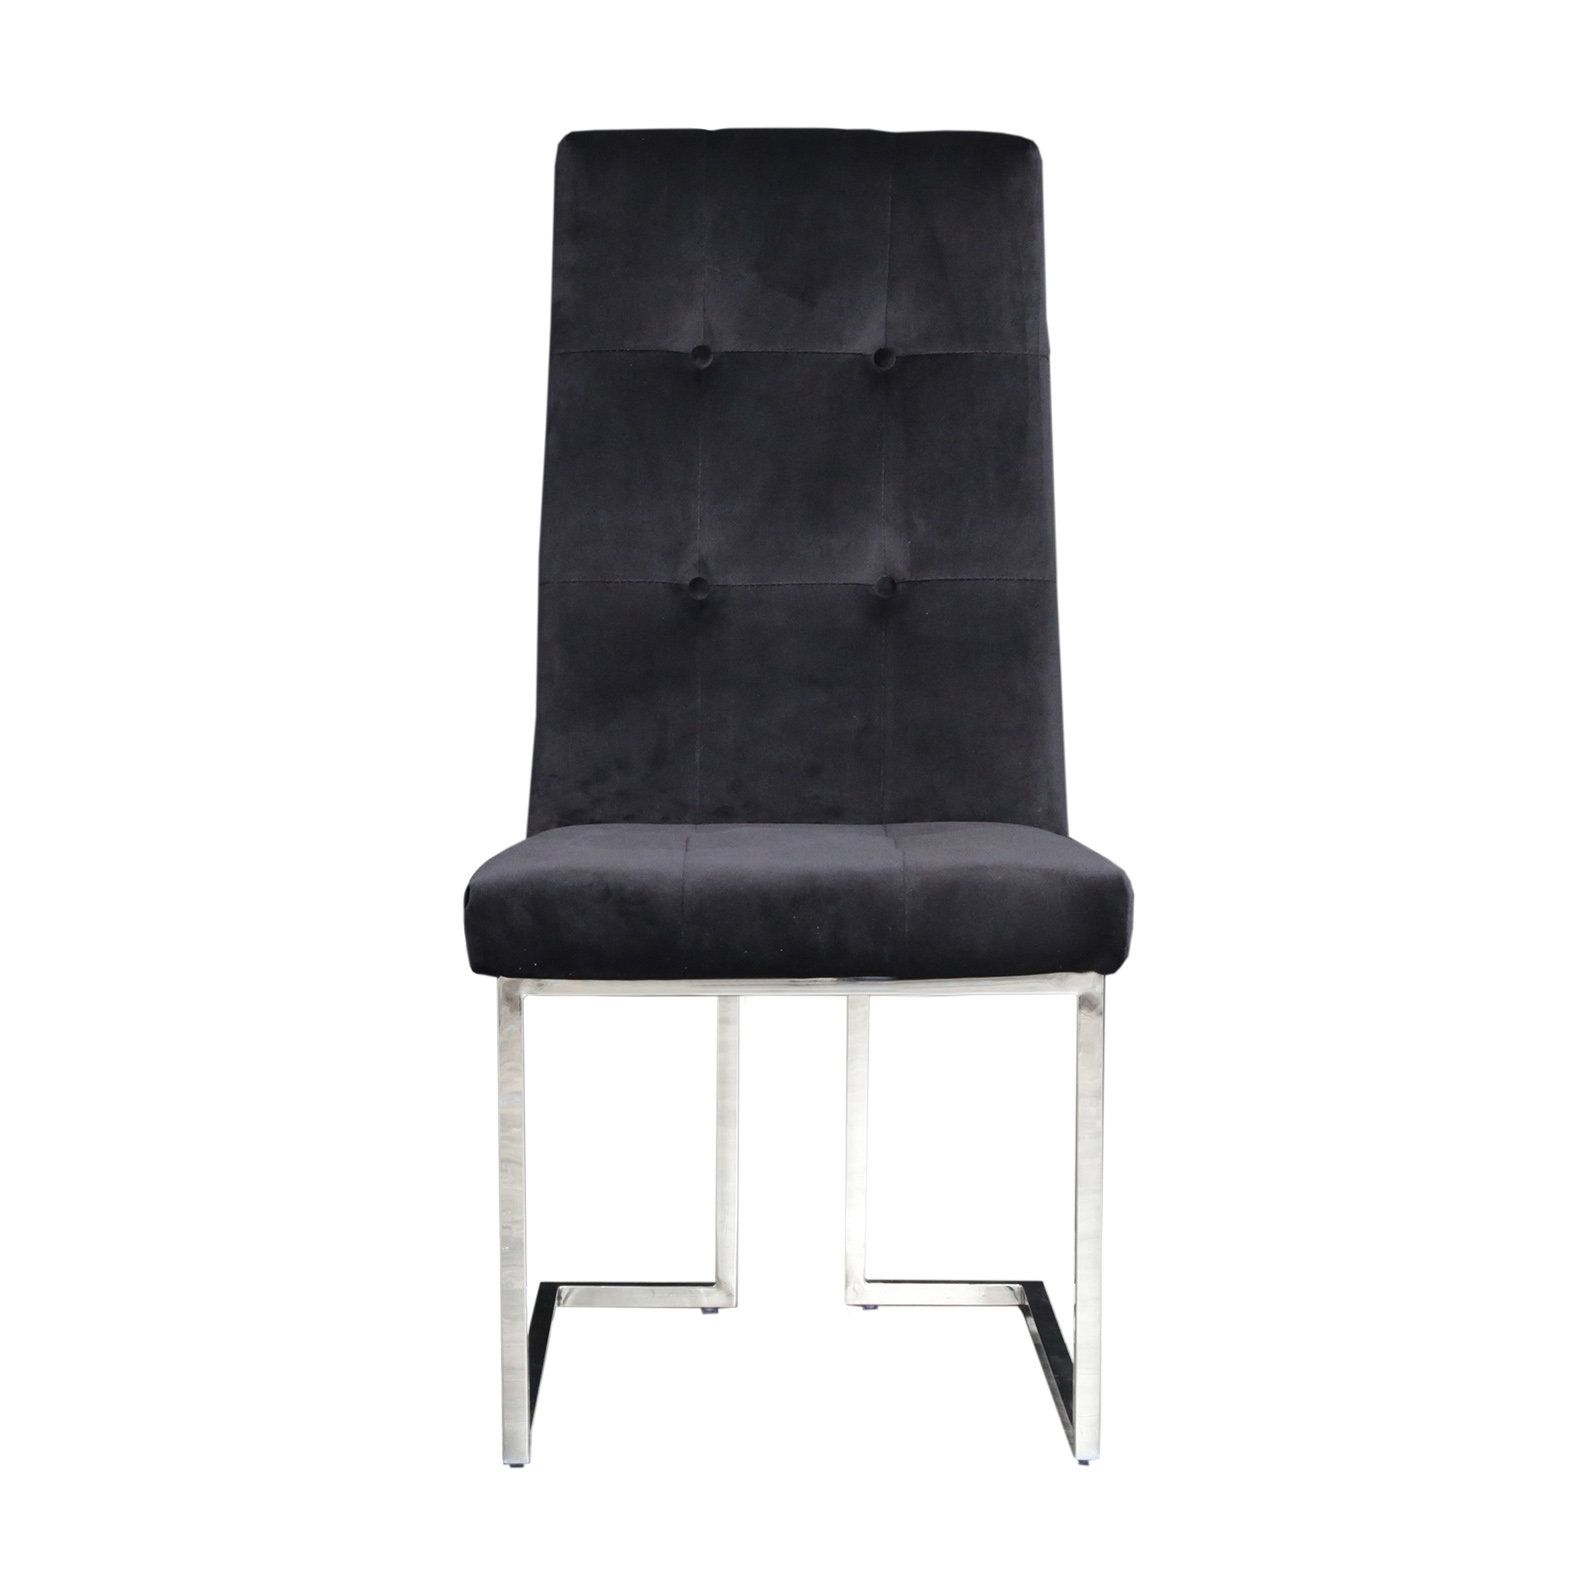 Wayfair Pertaining To Caden Upholstered Side Chairs (View 12 of 20)